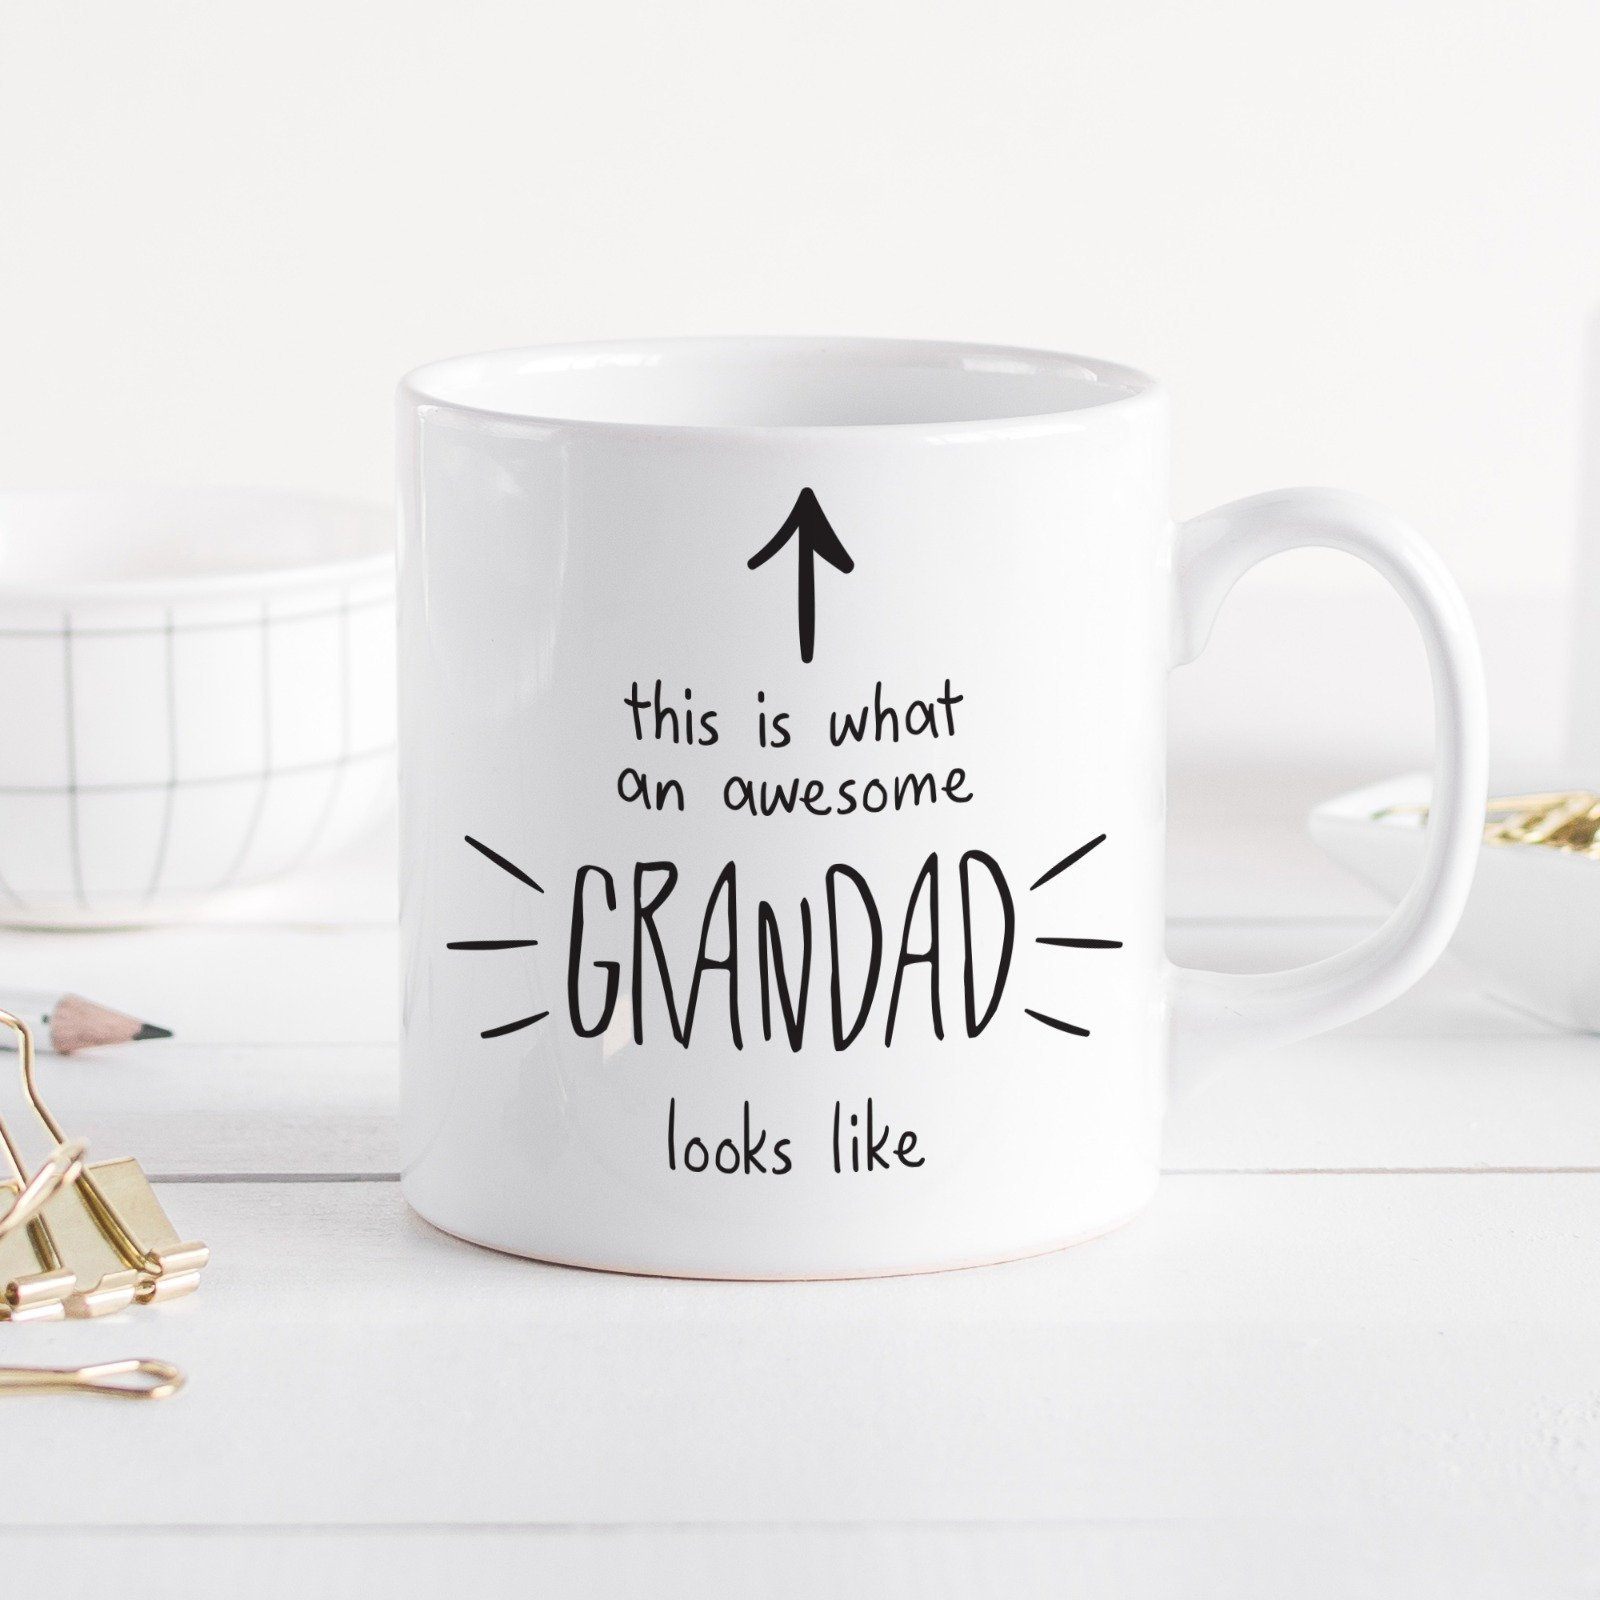 This Is What An Awesome Grandad Looks Like Mug, Father's Day Gift, Birthday Gift For Grandpa